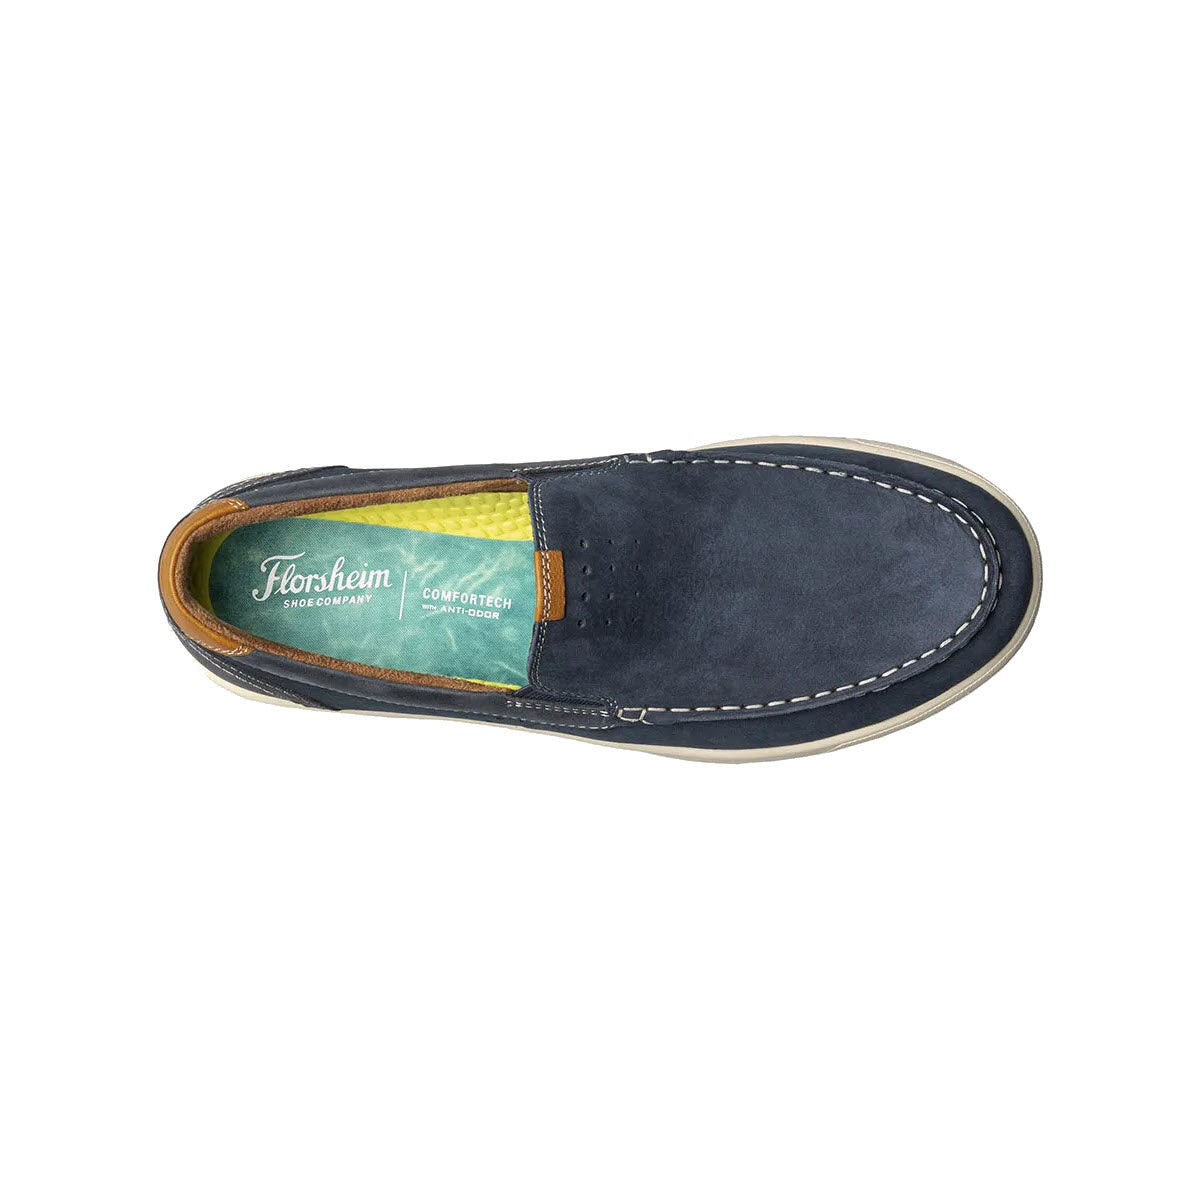 Top-down view of a single navy blue Florsheim Crossover Moc Toe slip-on shoe with contrast stitching and a green interior label.